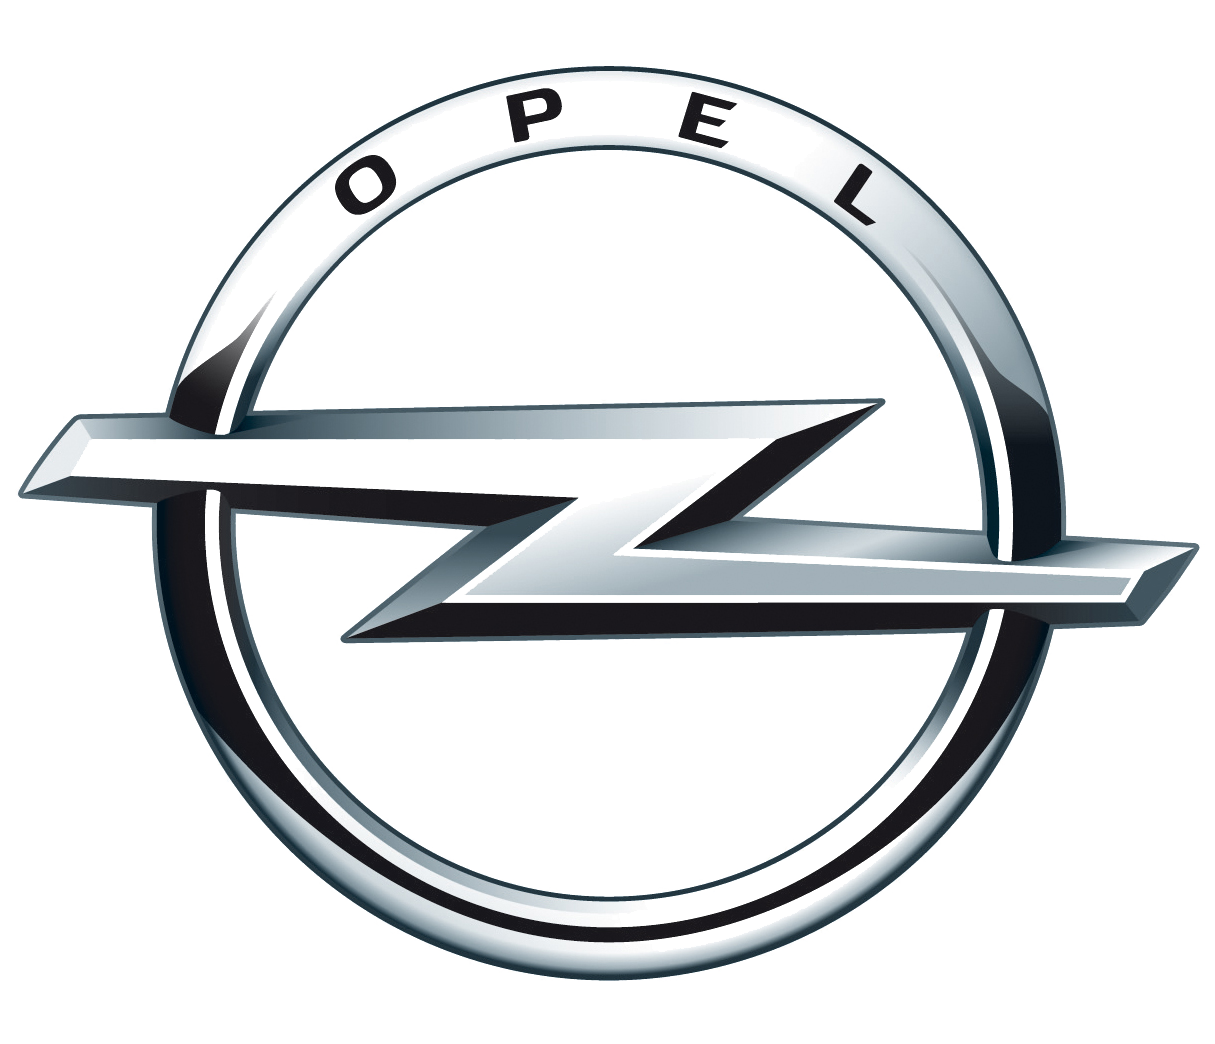 Opel Car Logo Png Brand Image - Opel, Transparent background PNG HD thumbnail